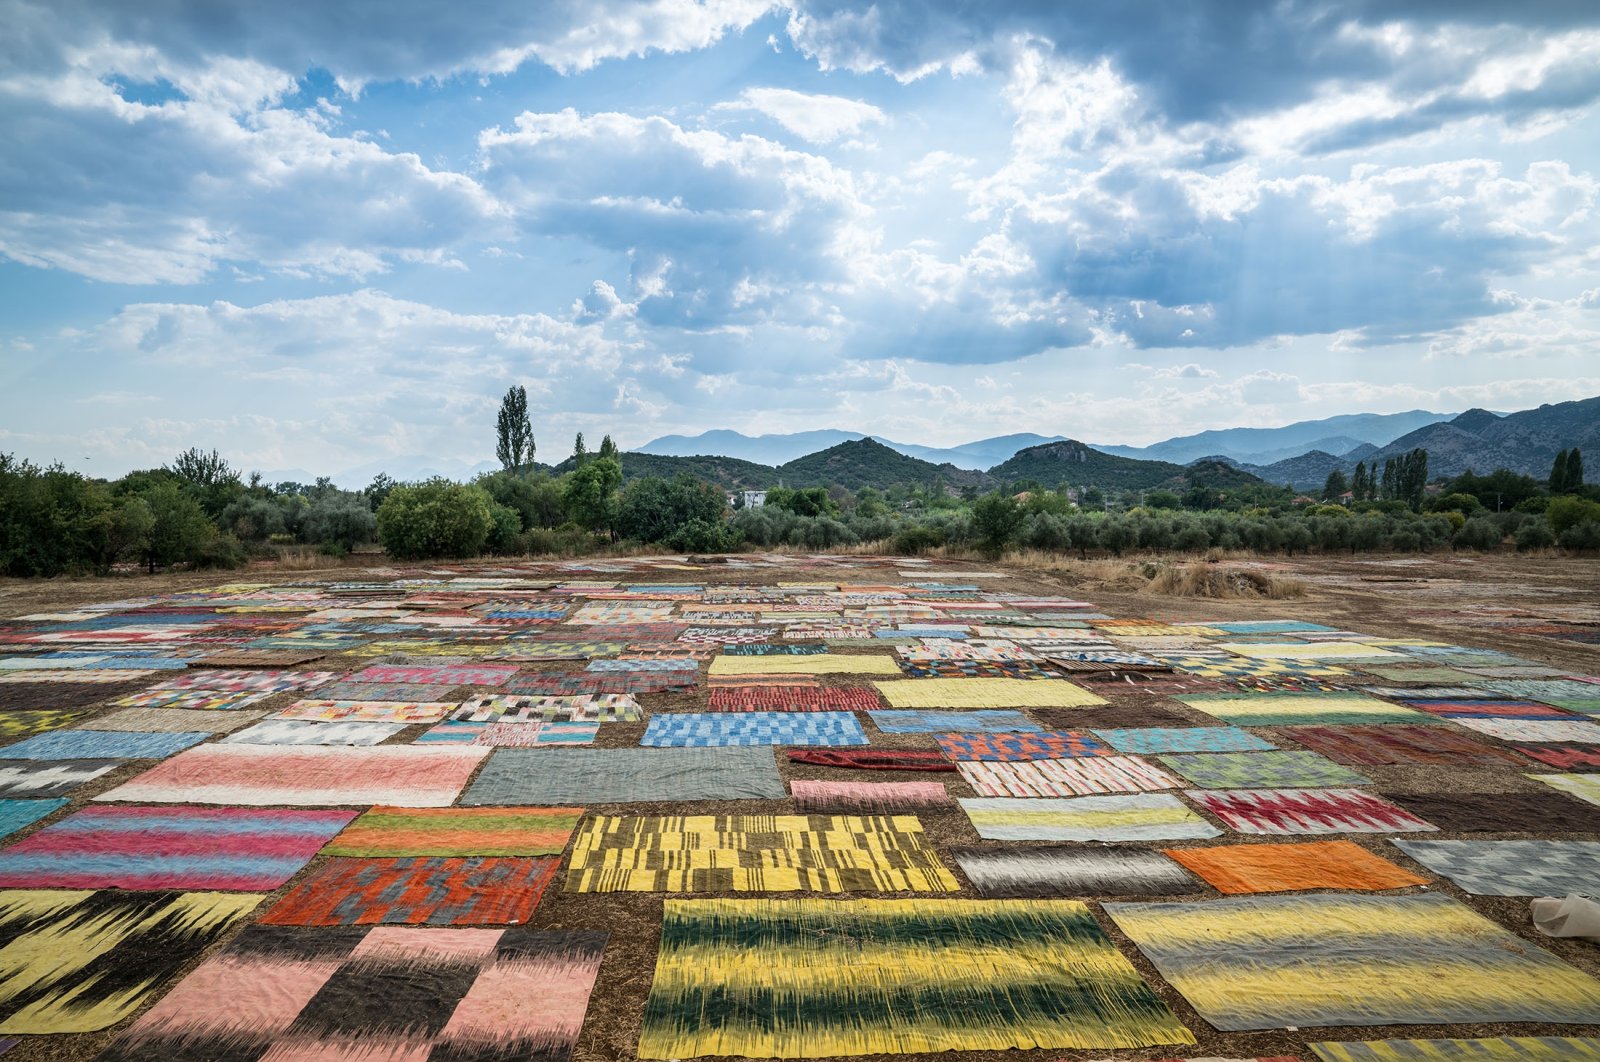 Carpets are laid out under the sun in a field, in Antalya, Türkiye. (Shutterstock Photo)